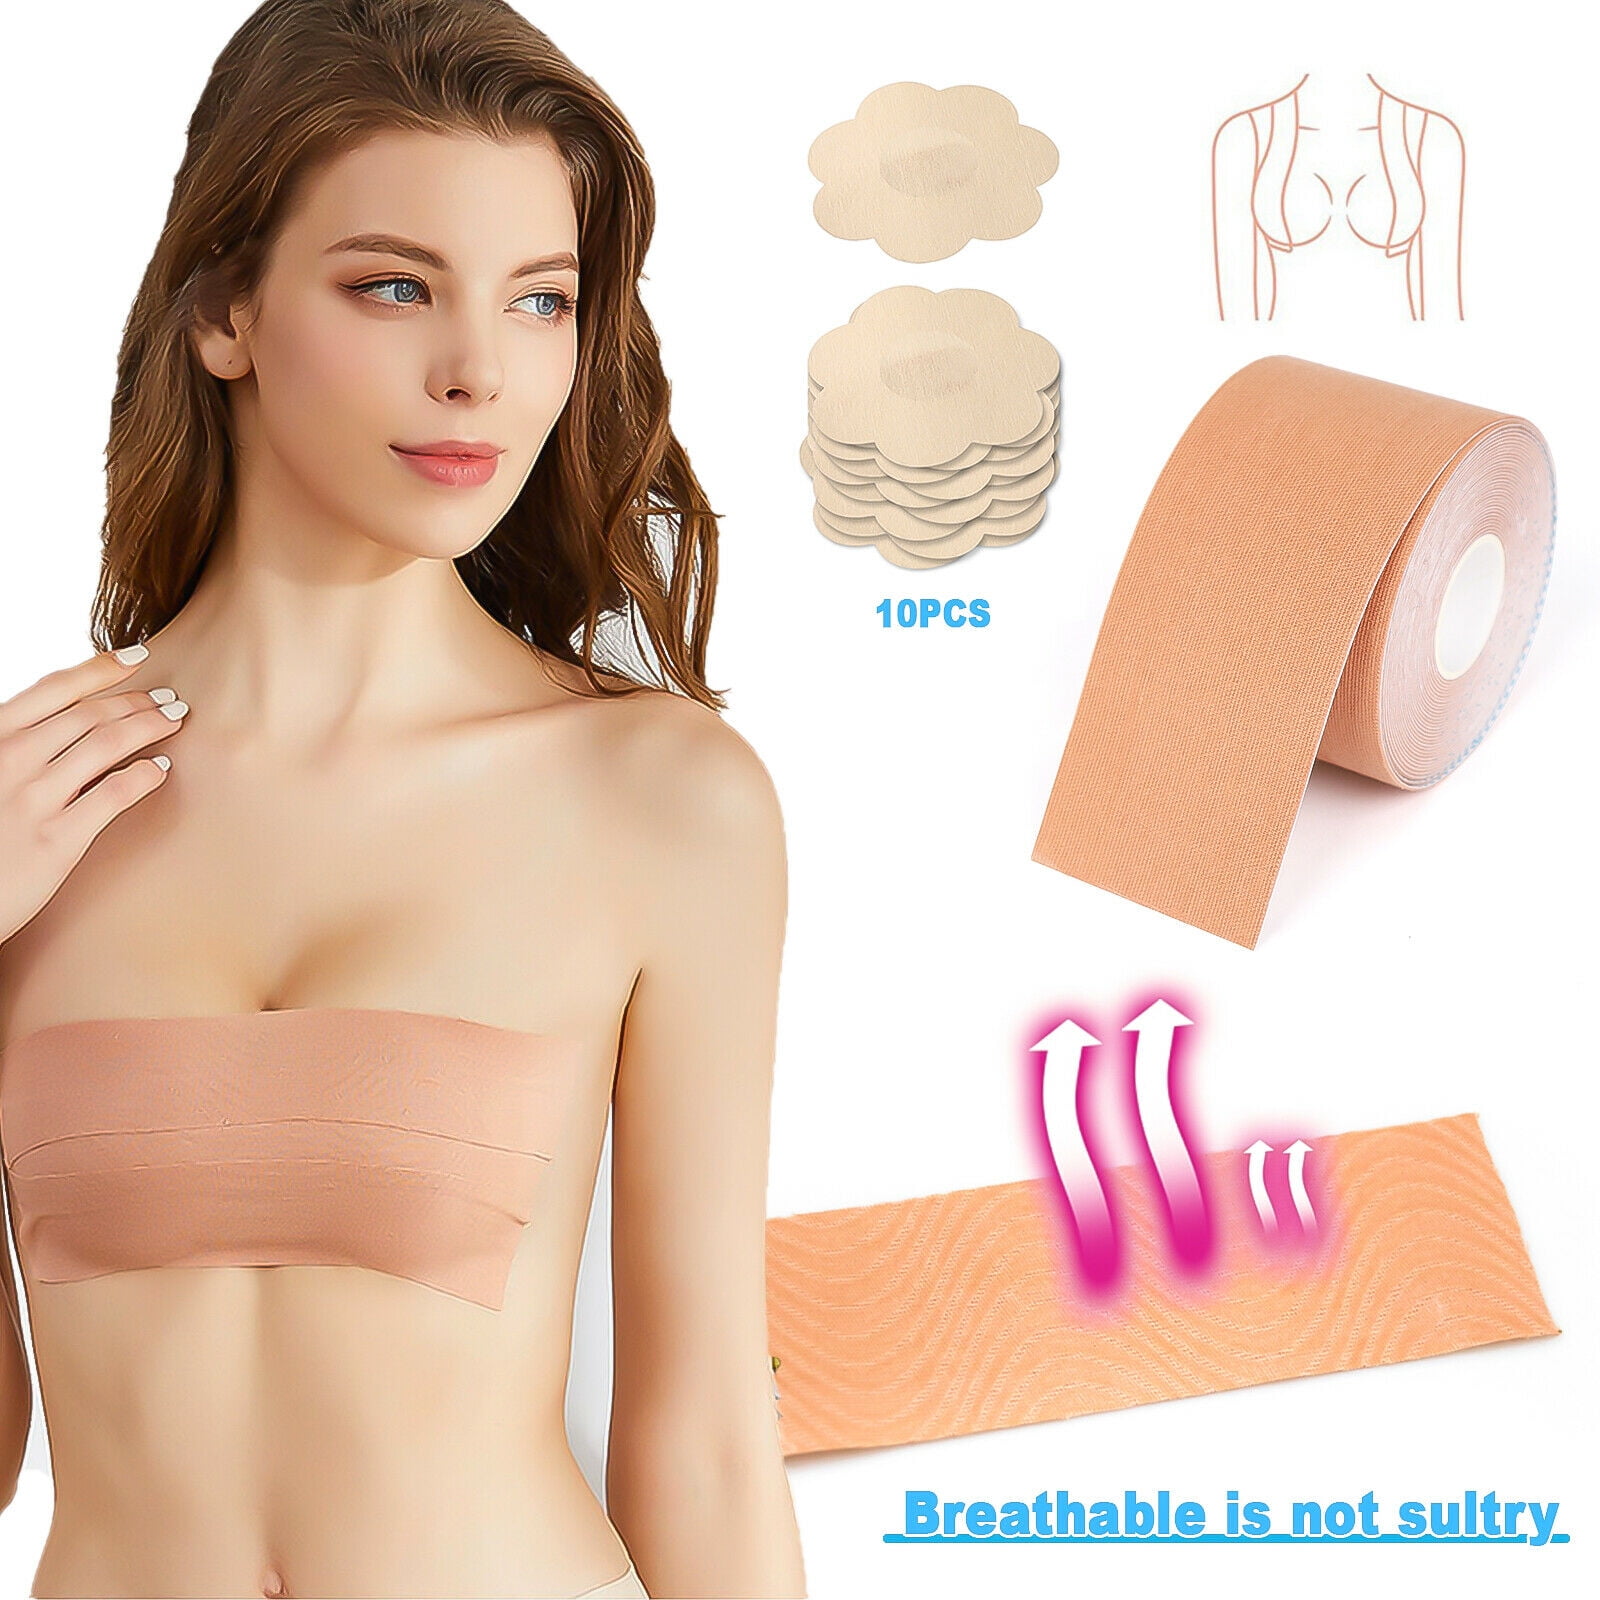 1 pair OUZHOU Women Invisible Silicone Breast Pads Boob Lift Tape Bra Nipple Cover Sticker Pad Bra Sticky Bra Nude Breathable chest patch Plum skin color